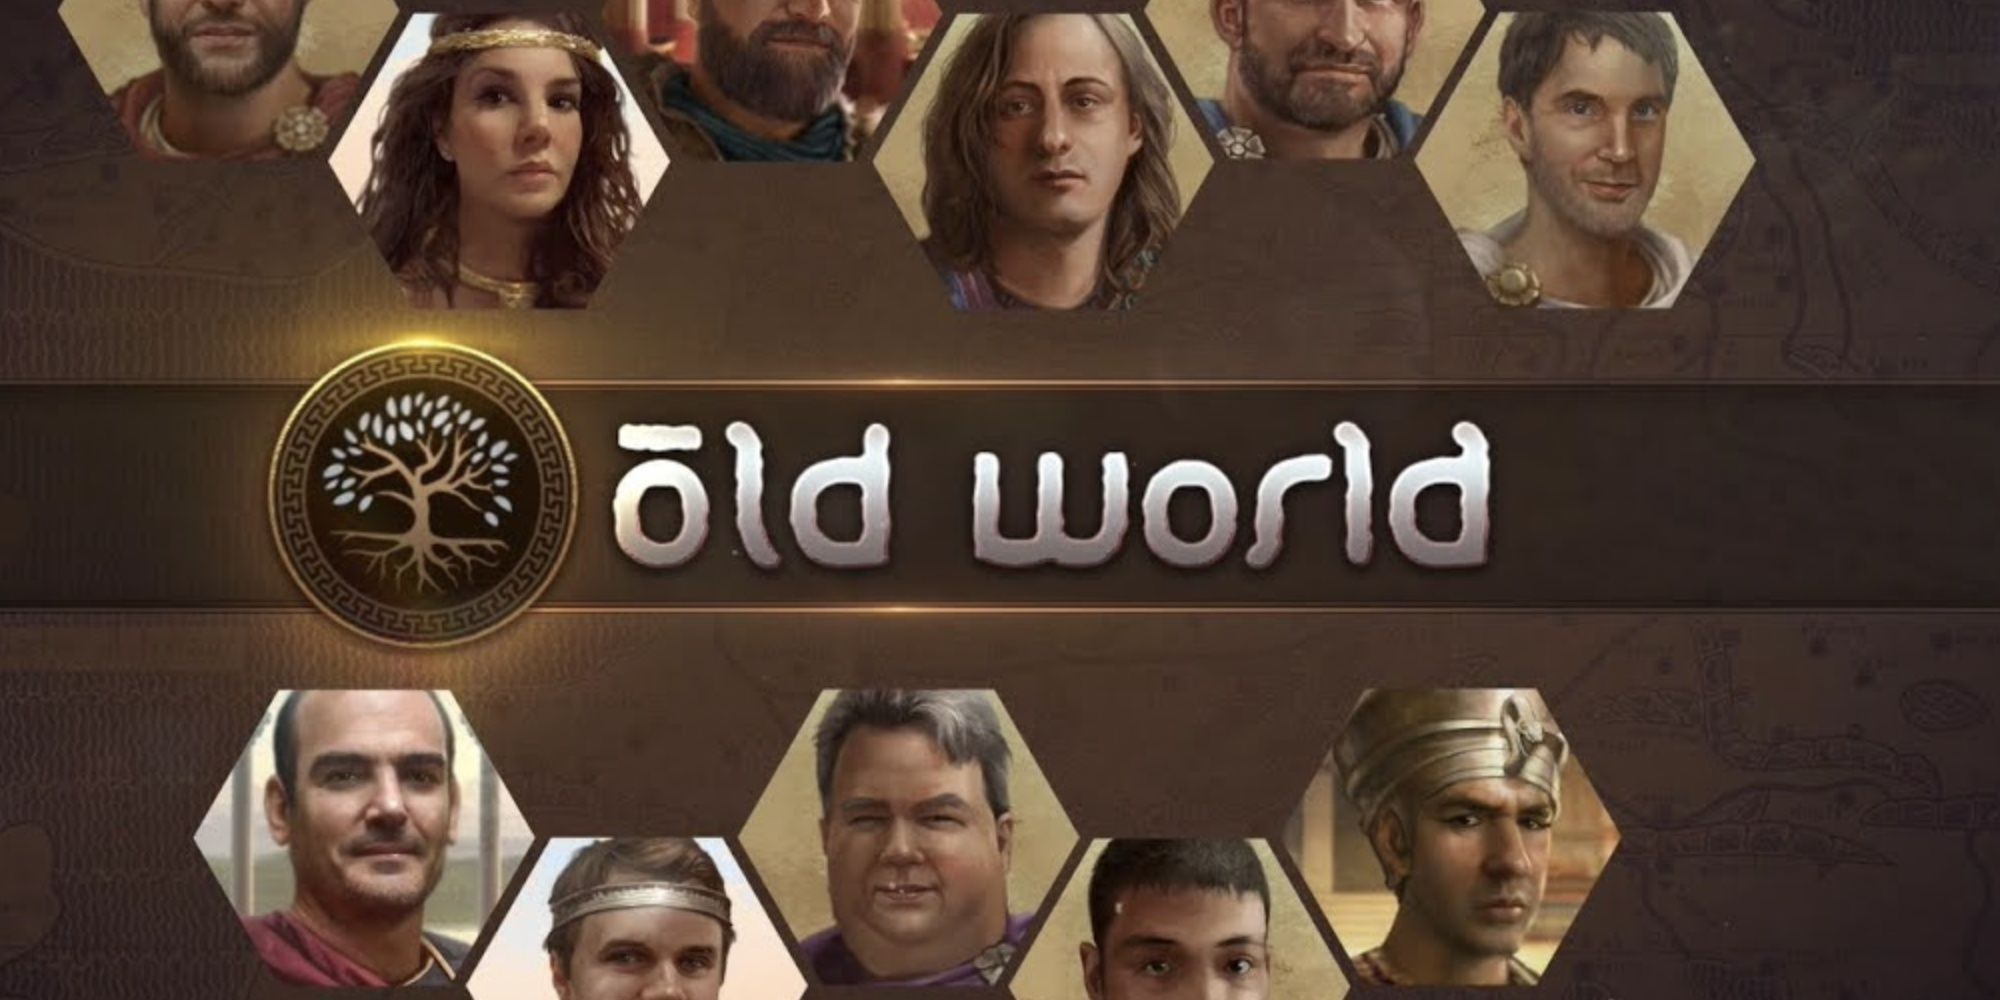 Different world leaders from various civilizations are represented on the cover of Old World